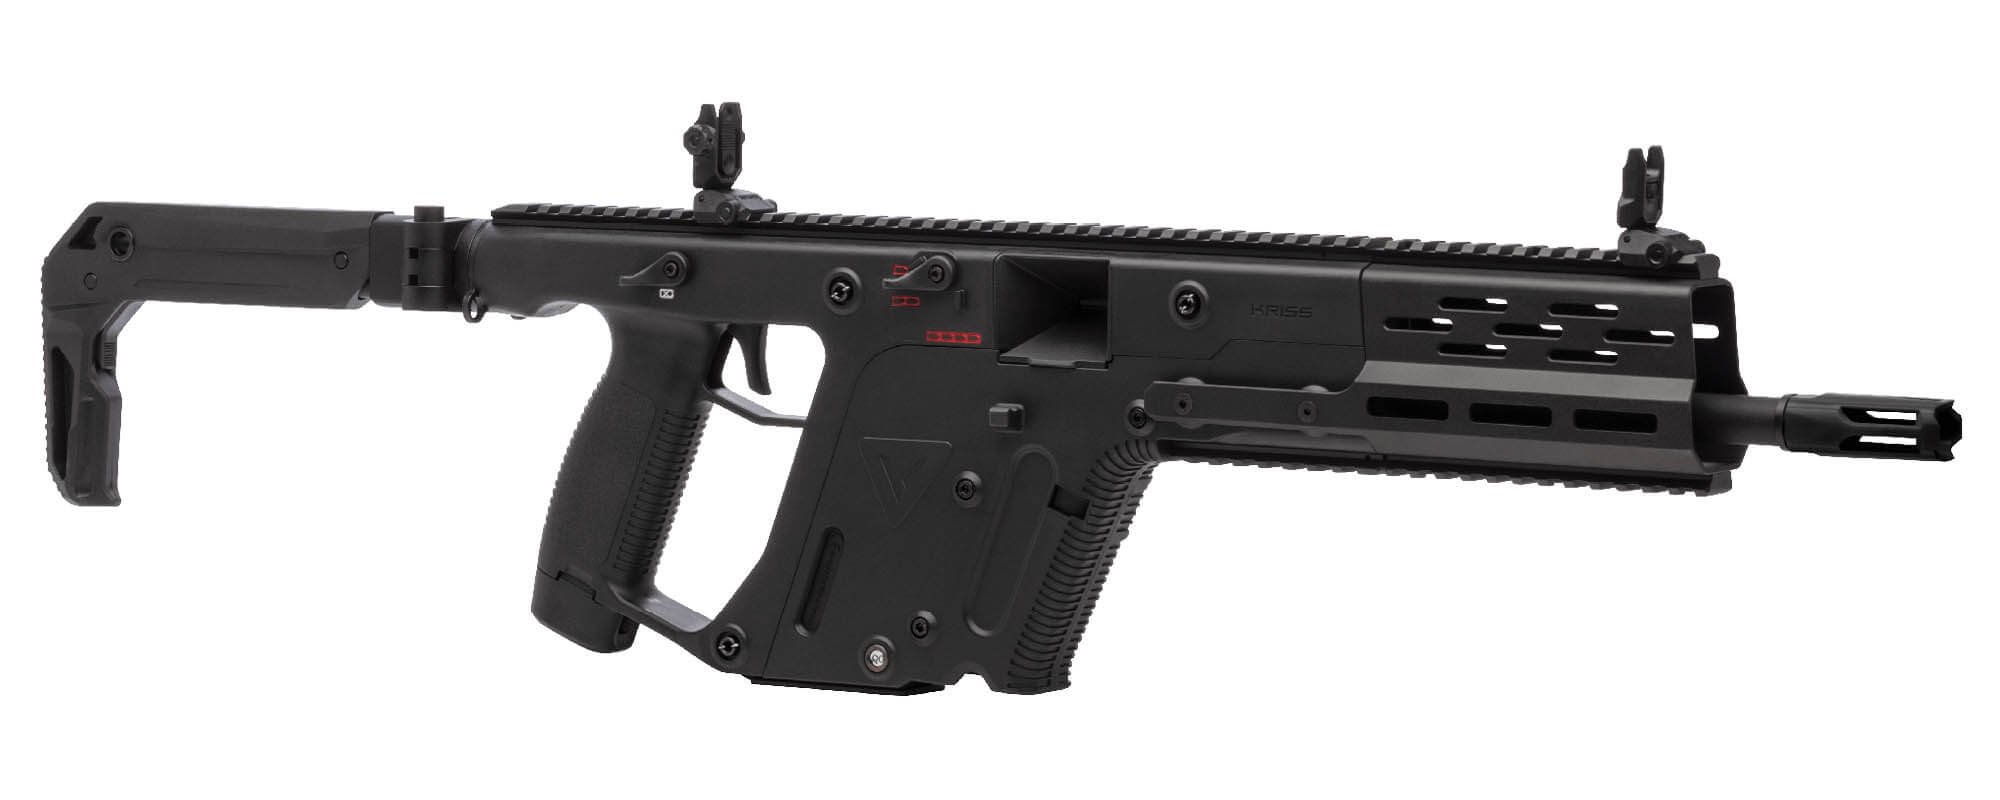 Krytac Kriss Vector Limited Edition